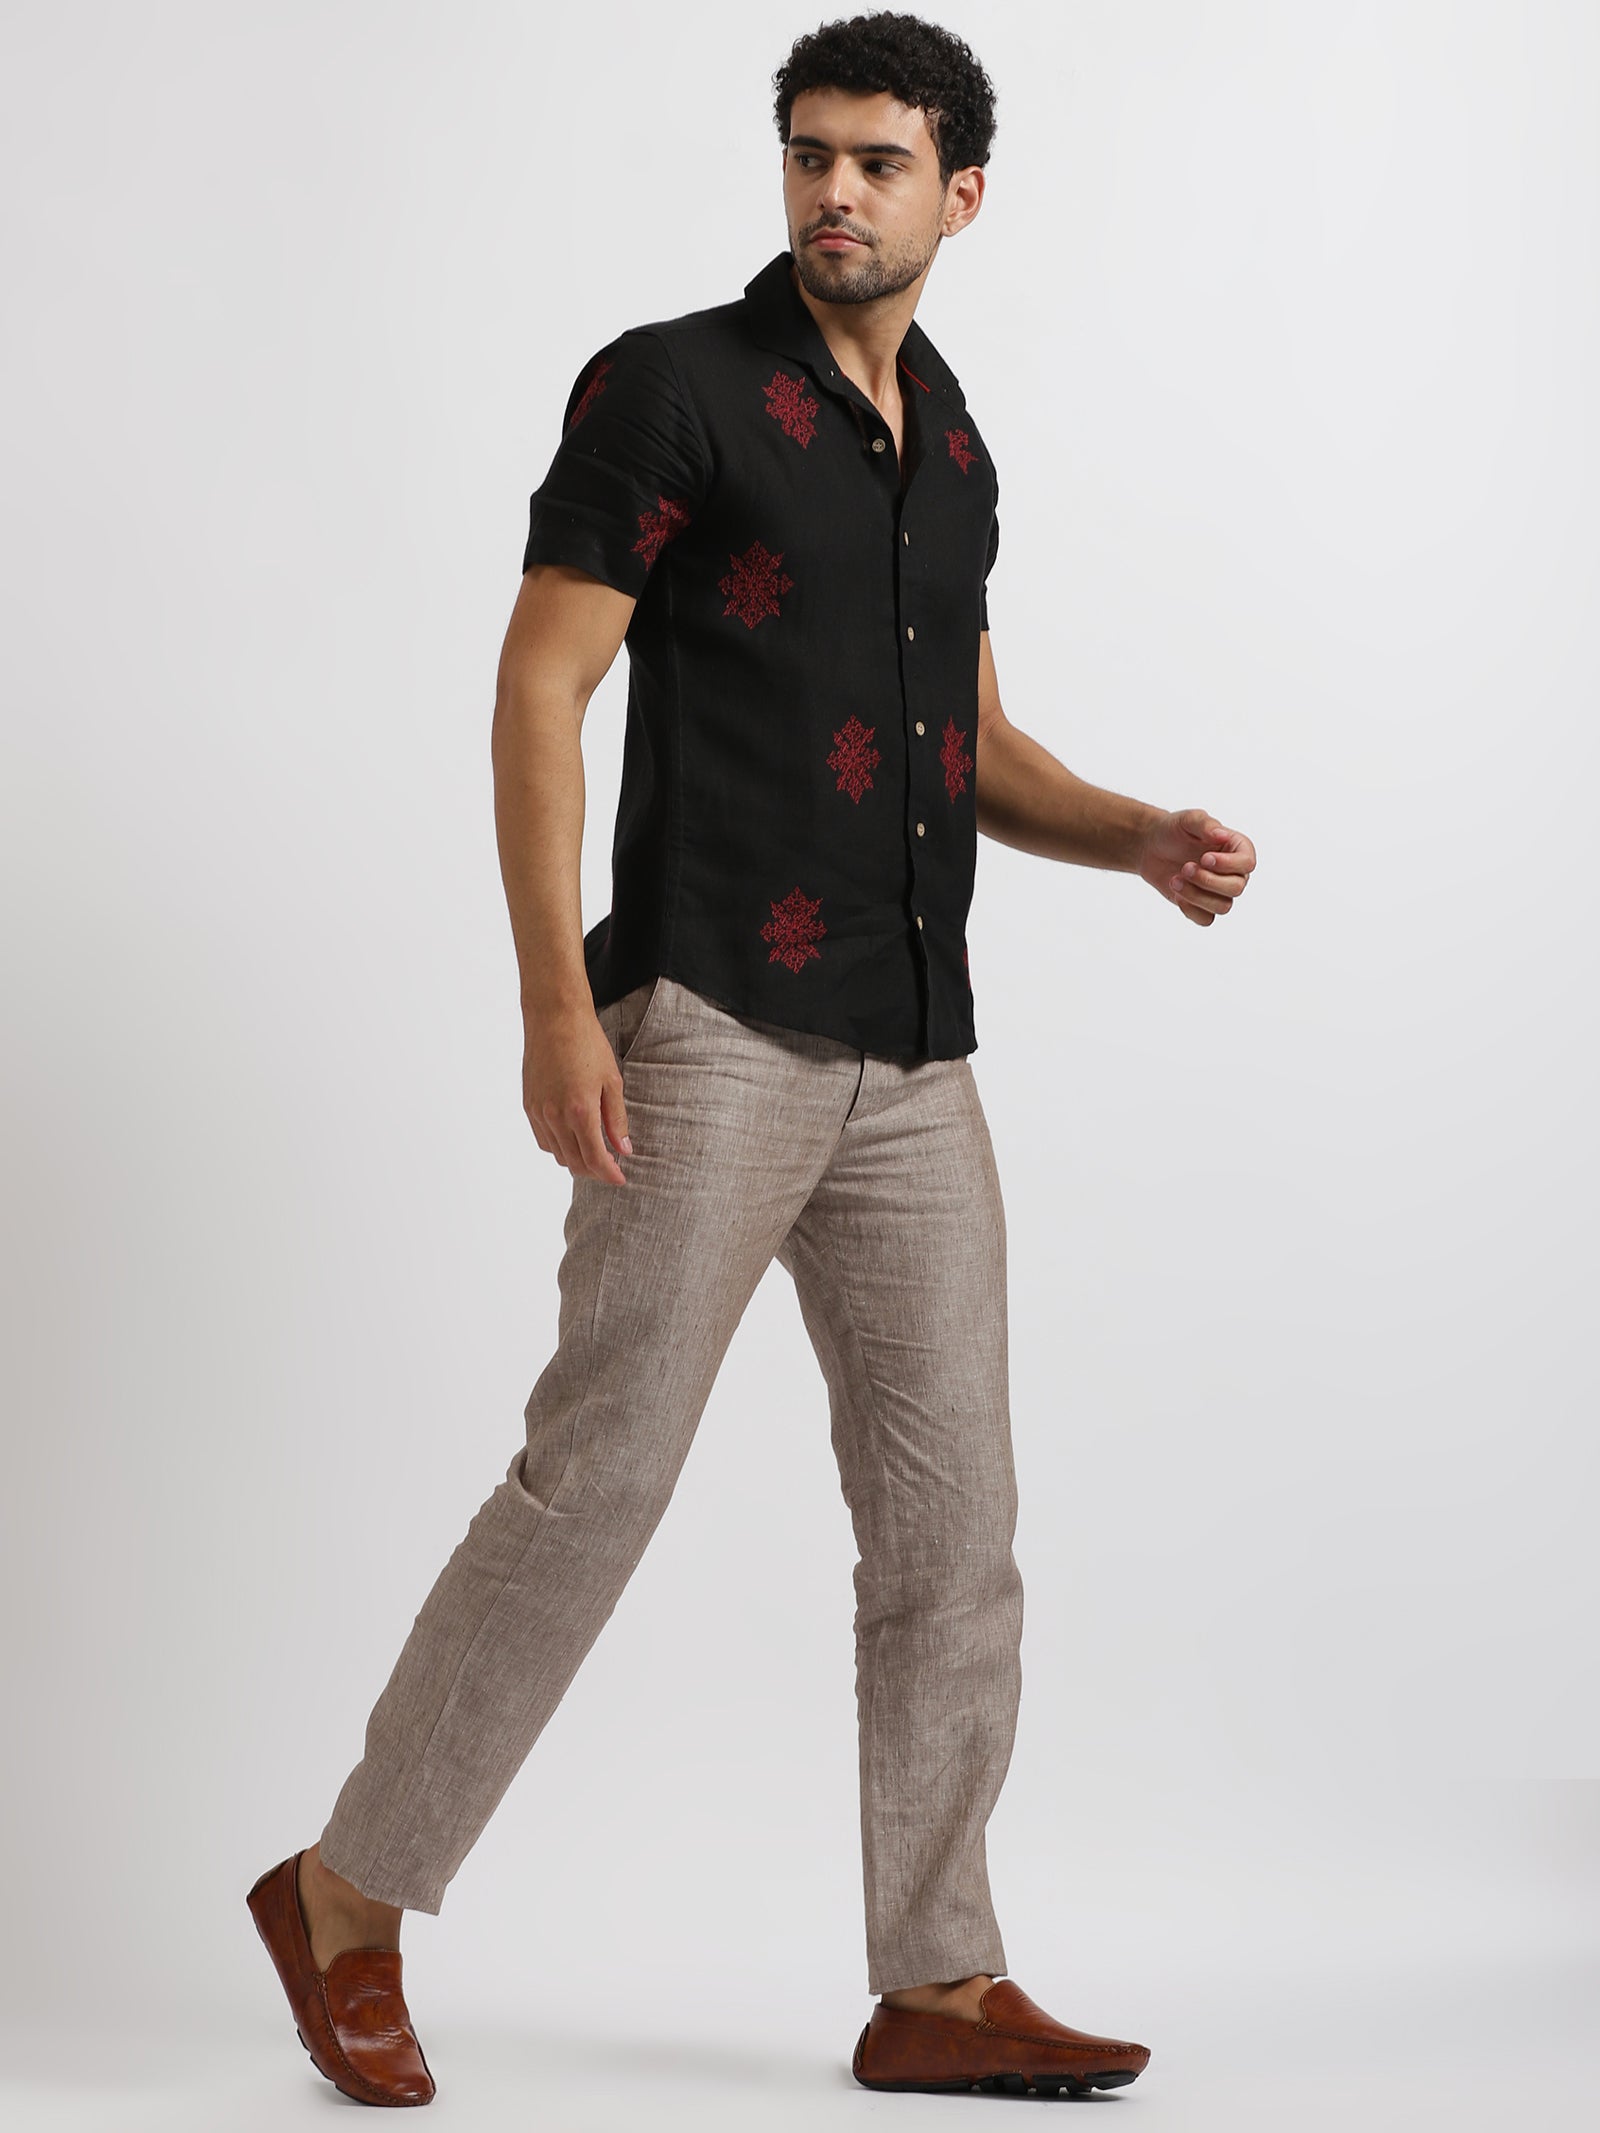 Red and Black Shirt with Pants Smart Casual Spring Outfits For Men In Their  30s (28 ideas & outfits) | Lookastic